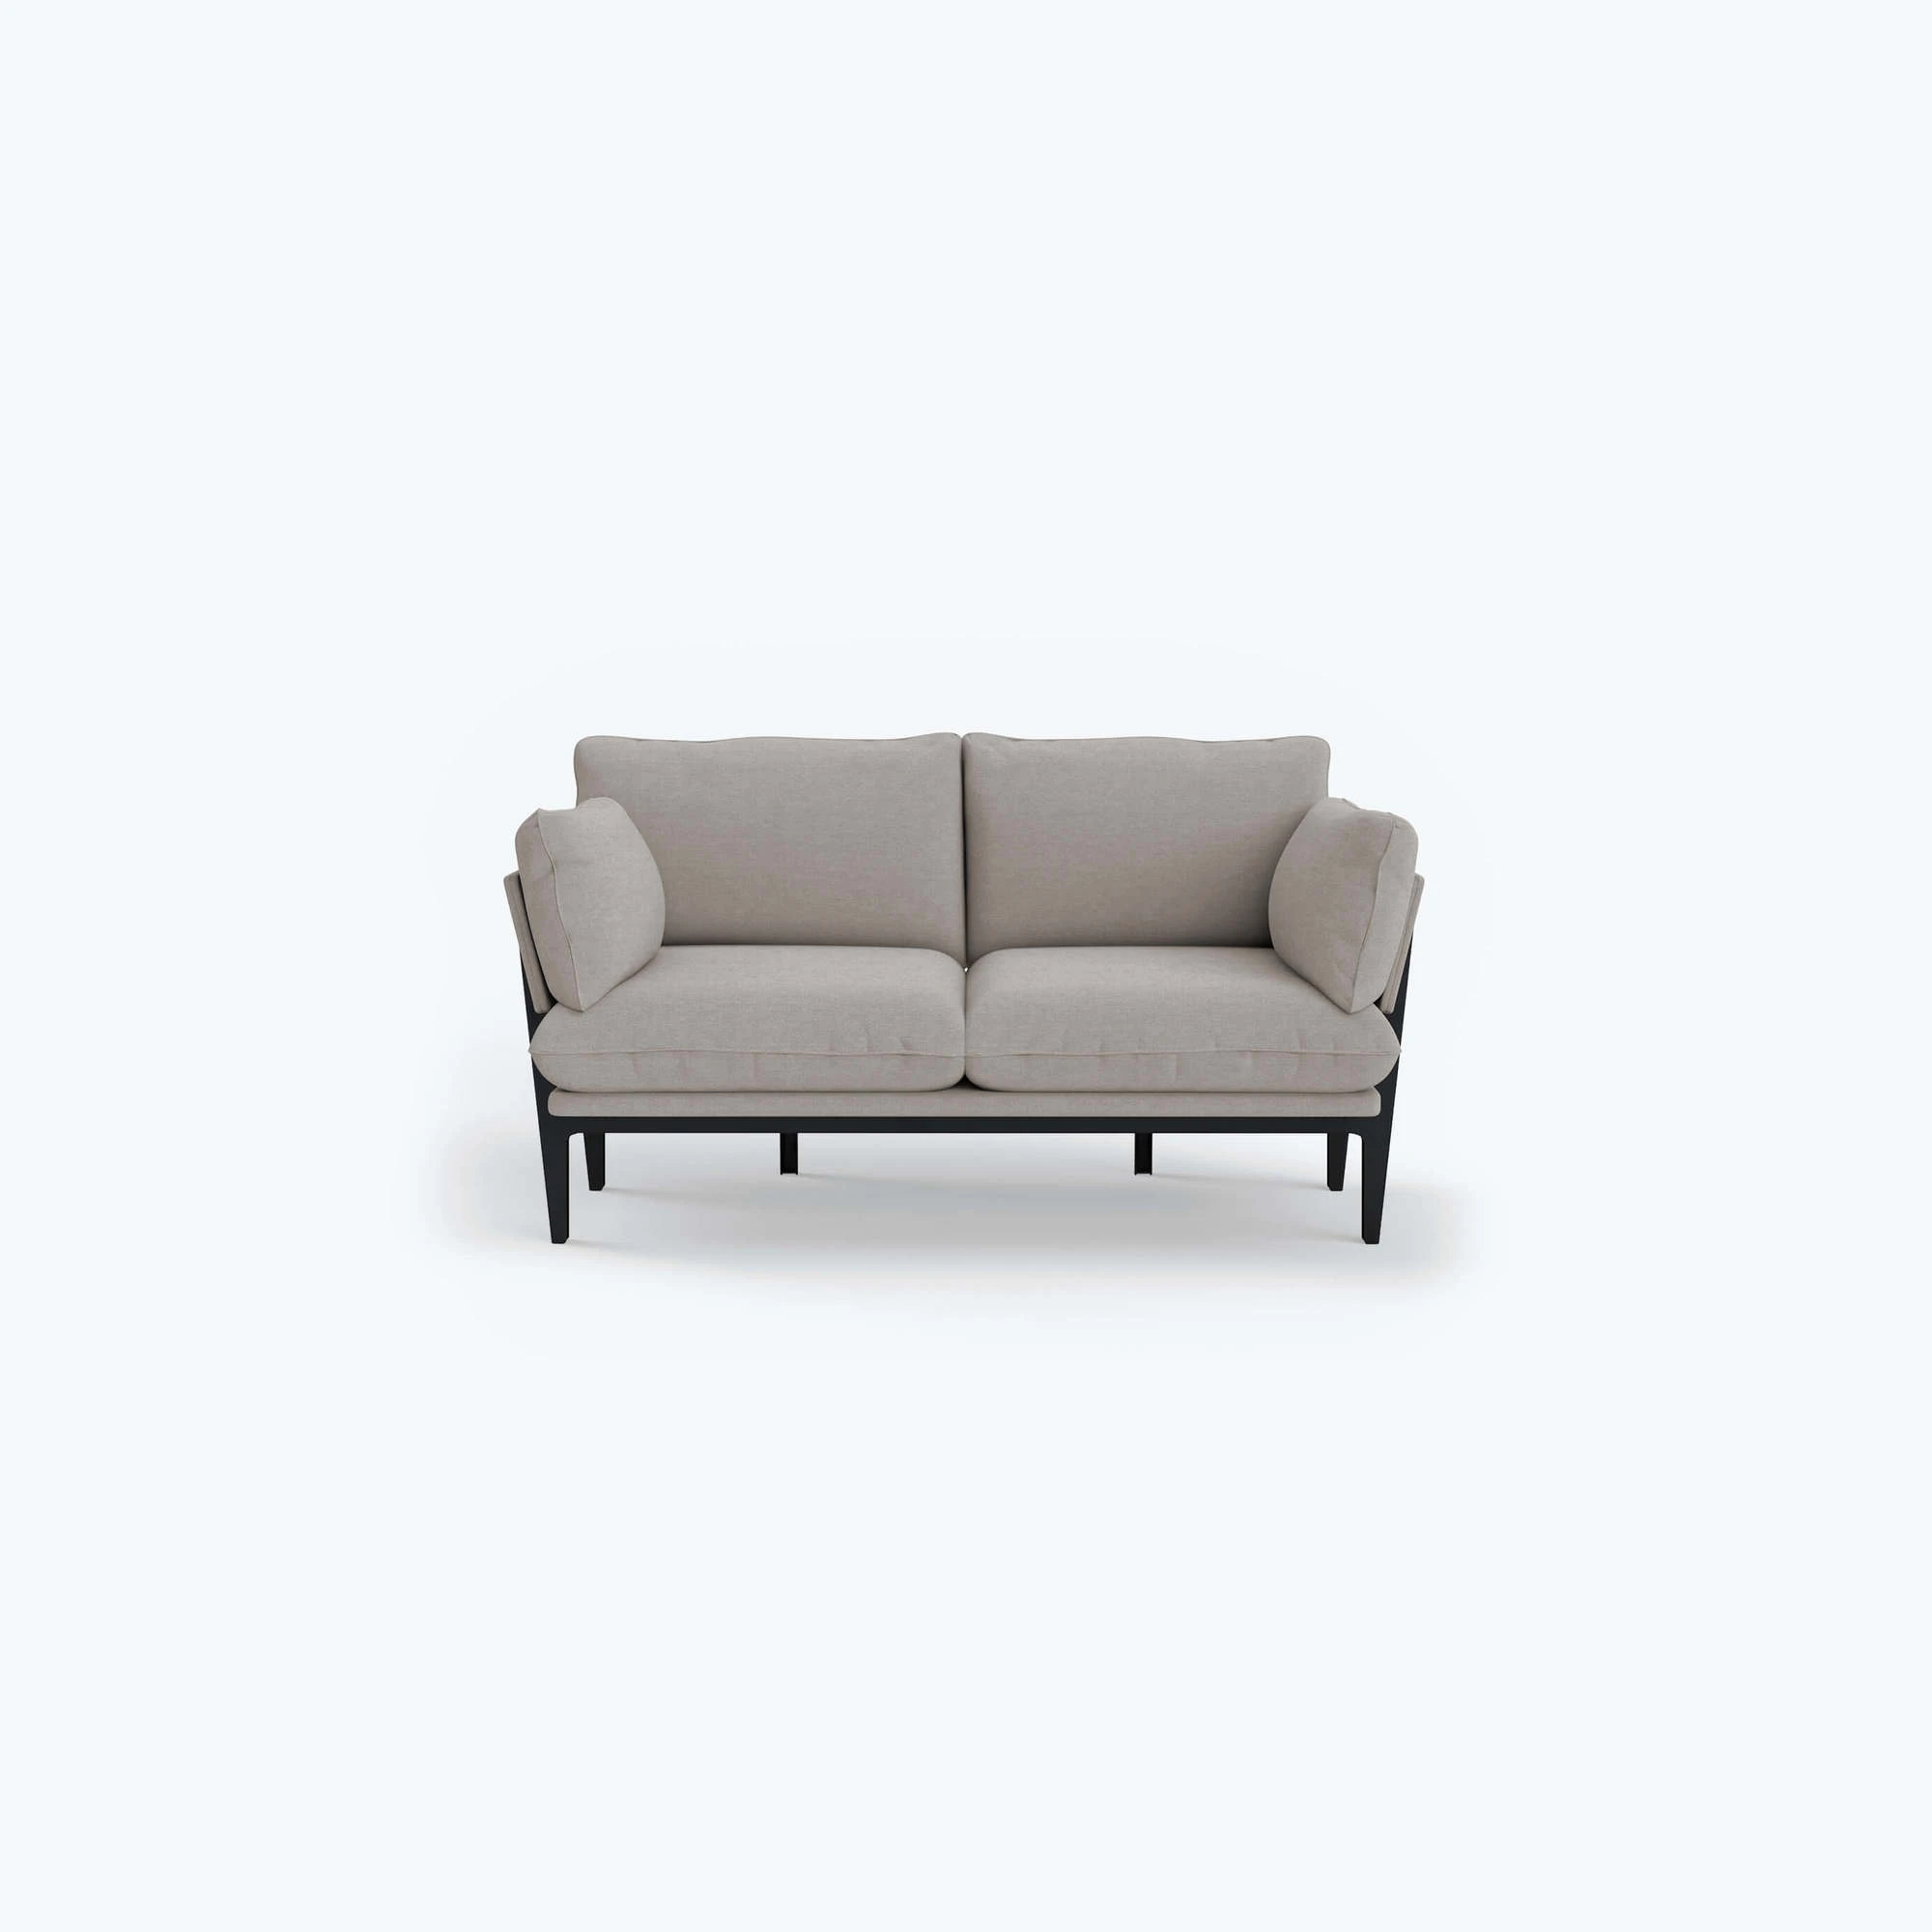 Modern fabric Living Room Chair Sofa with backrest Armchair love seat two-seater sofa